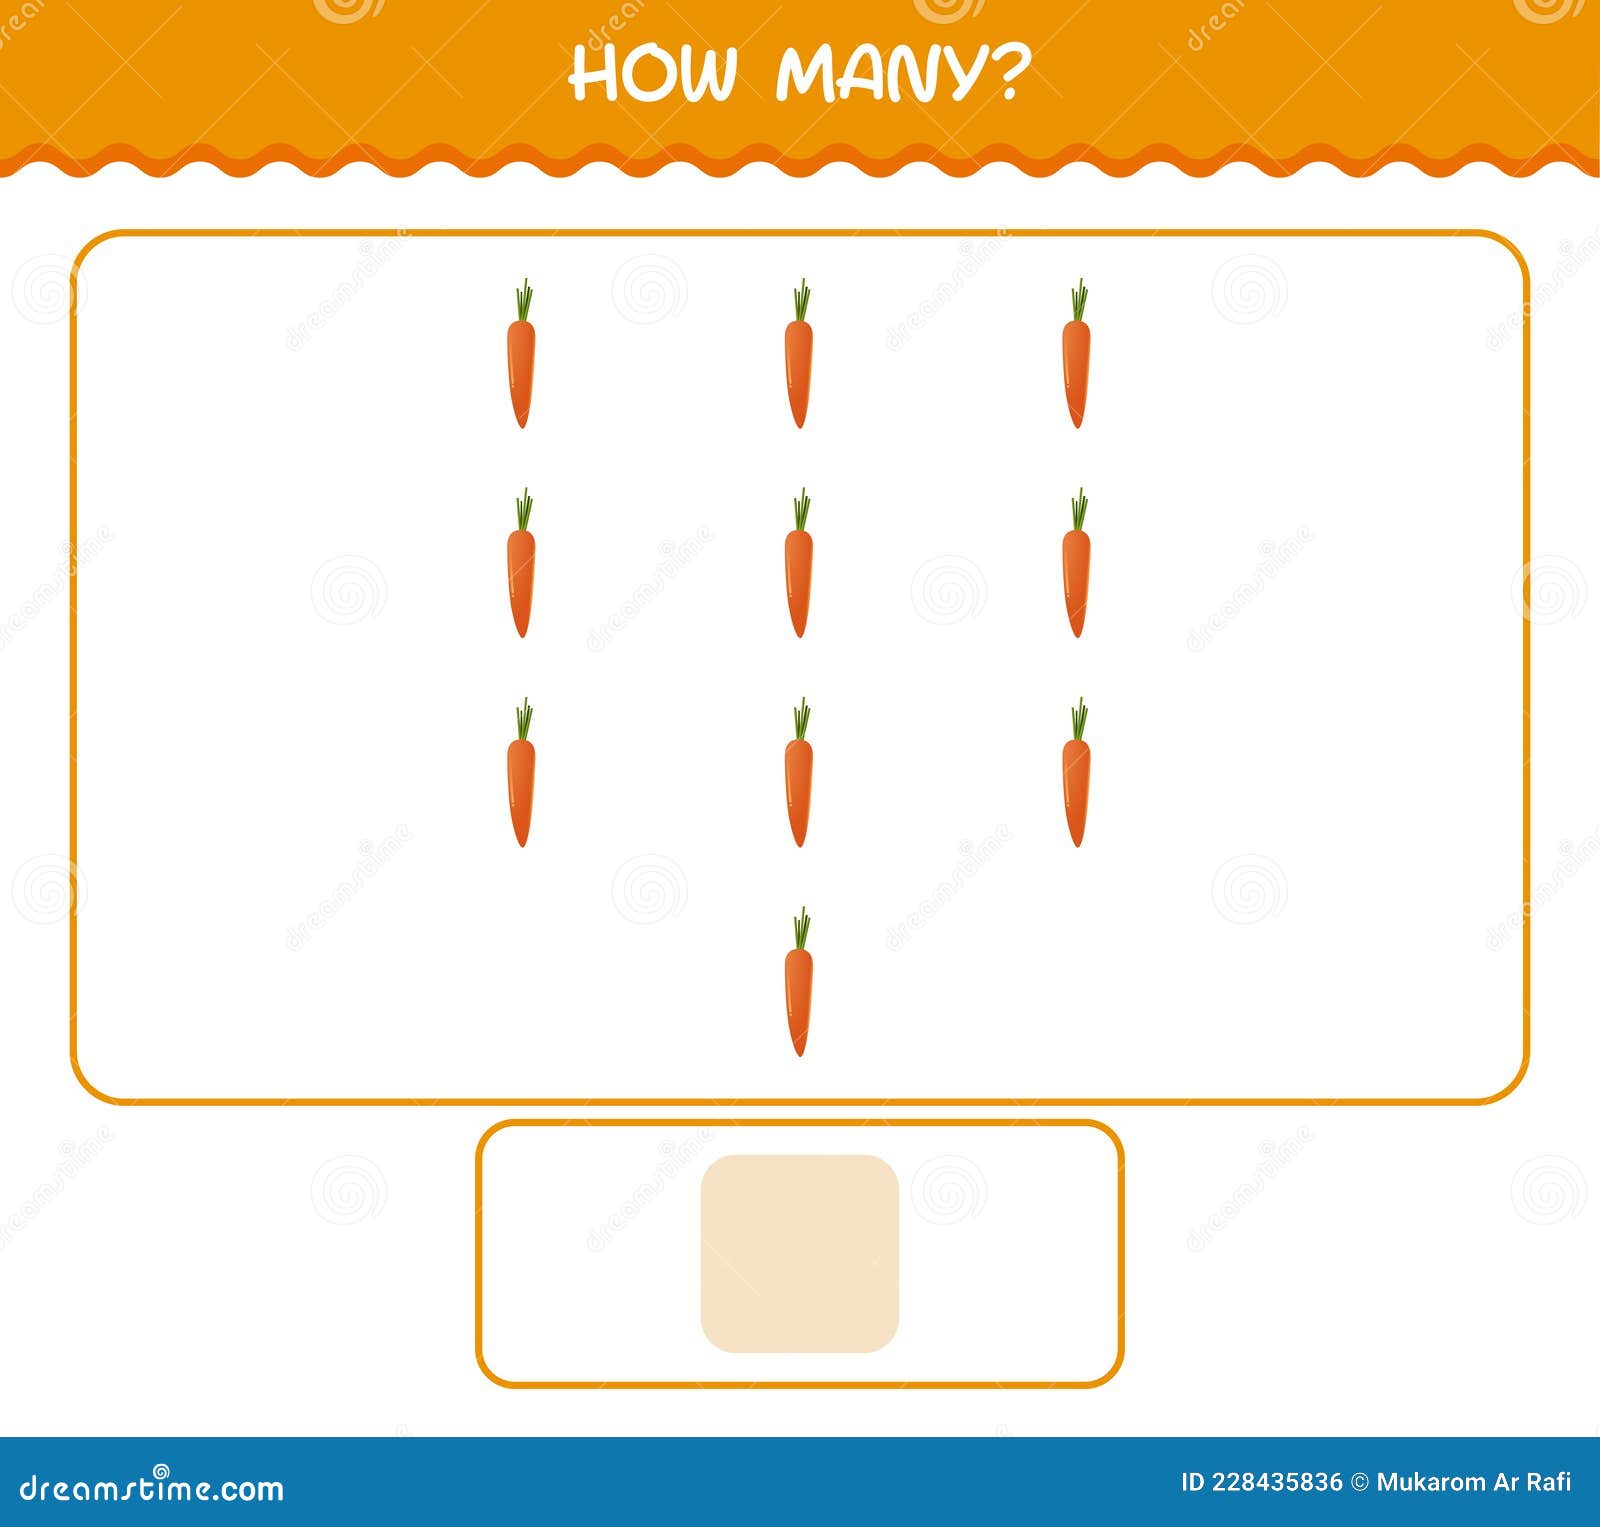 how-many-cartoon-carrot-counting-game-stock-vector-illustration-of-children-activity-228435836